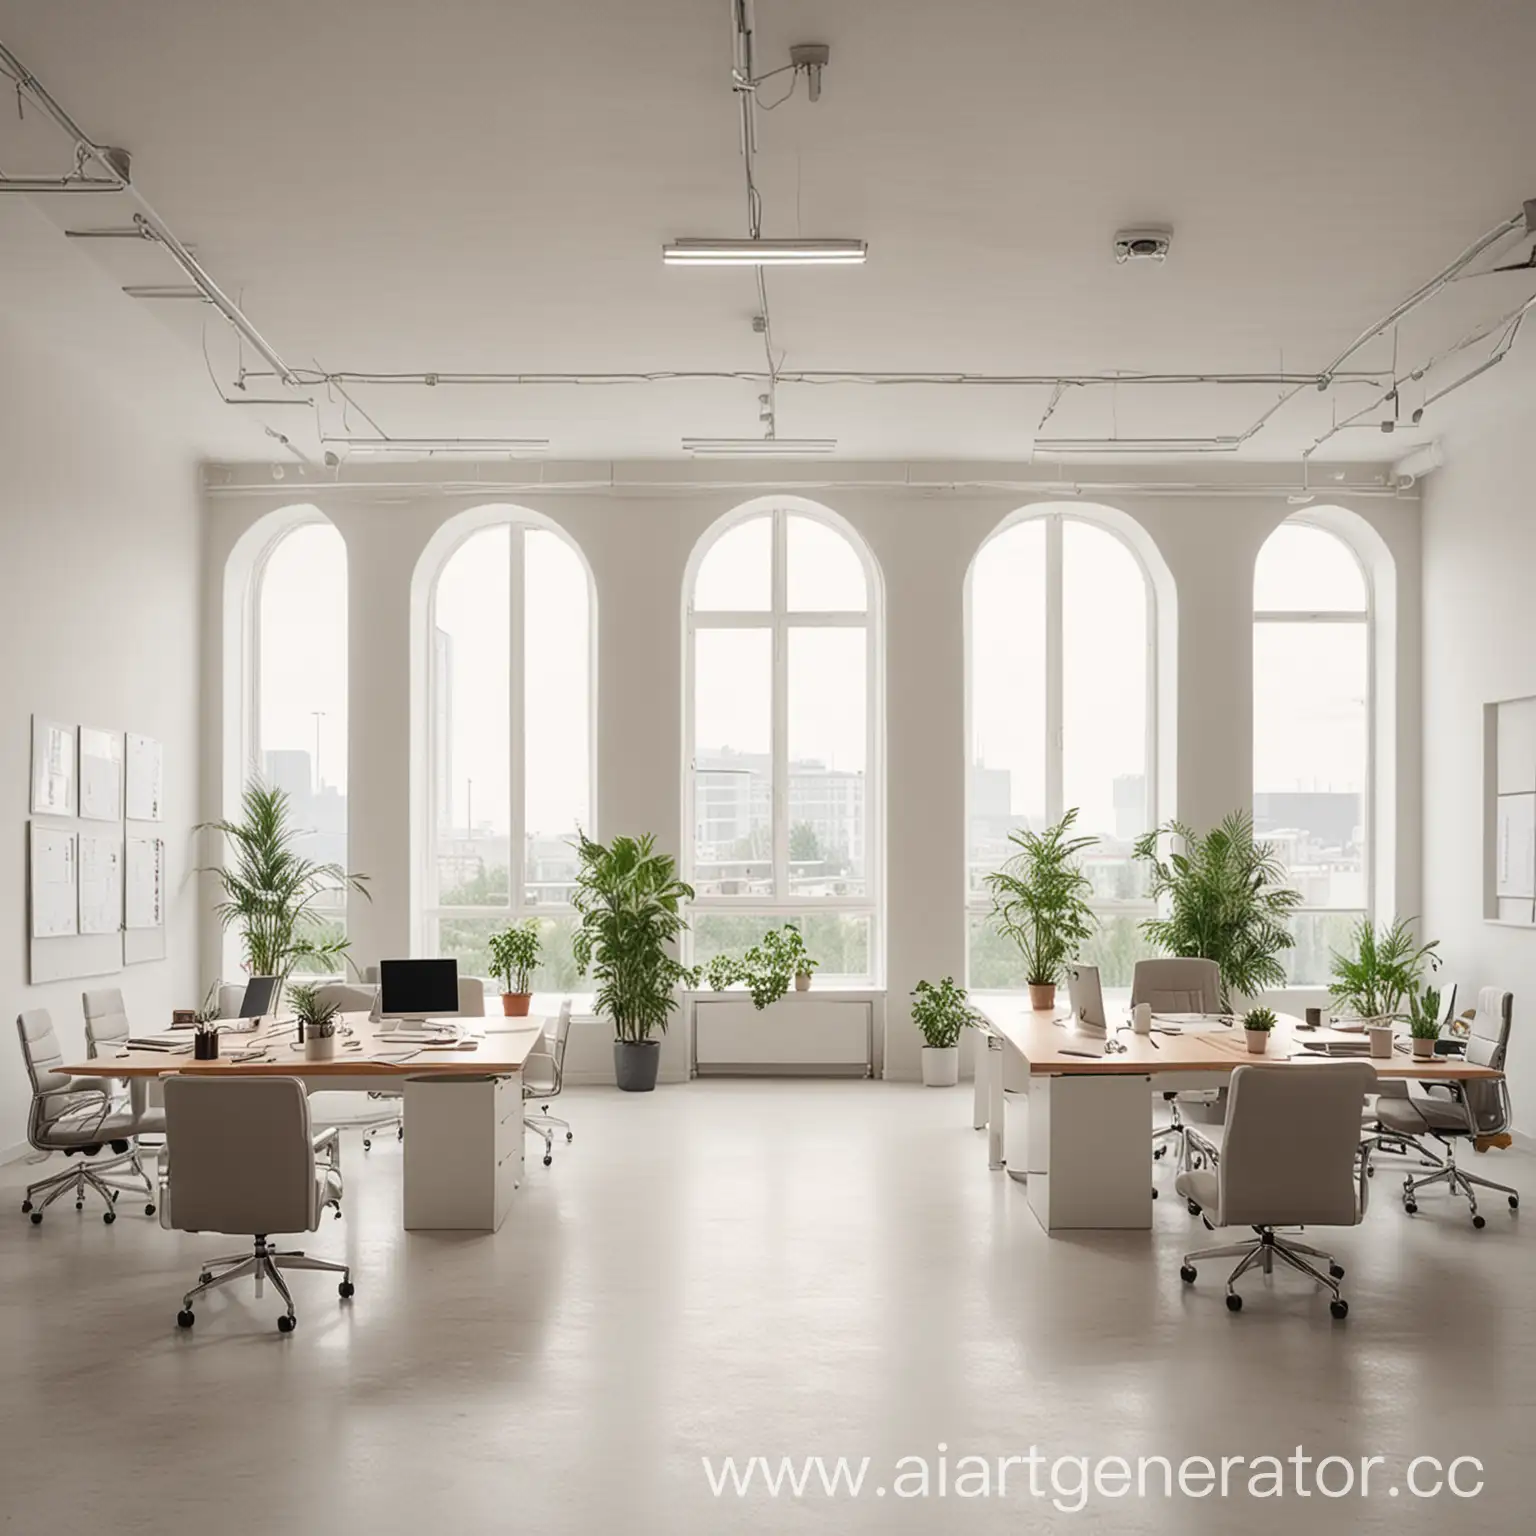 Modern-Office-Workspace-with-Minimalist-Design-and-Panoramic-Views